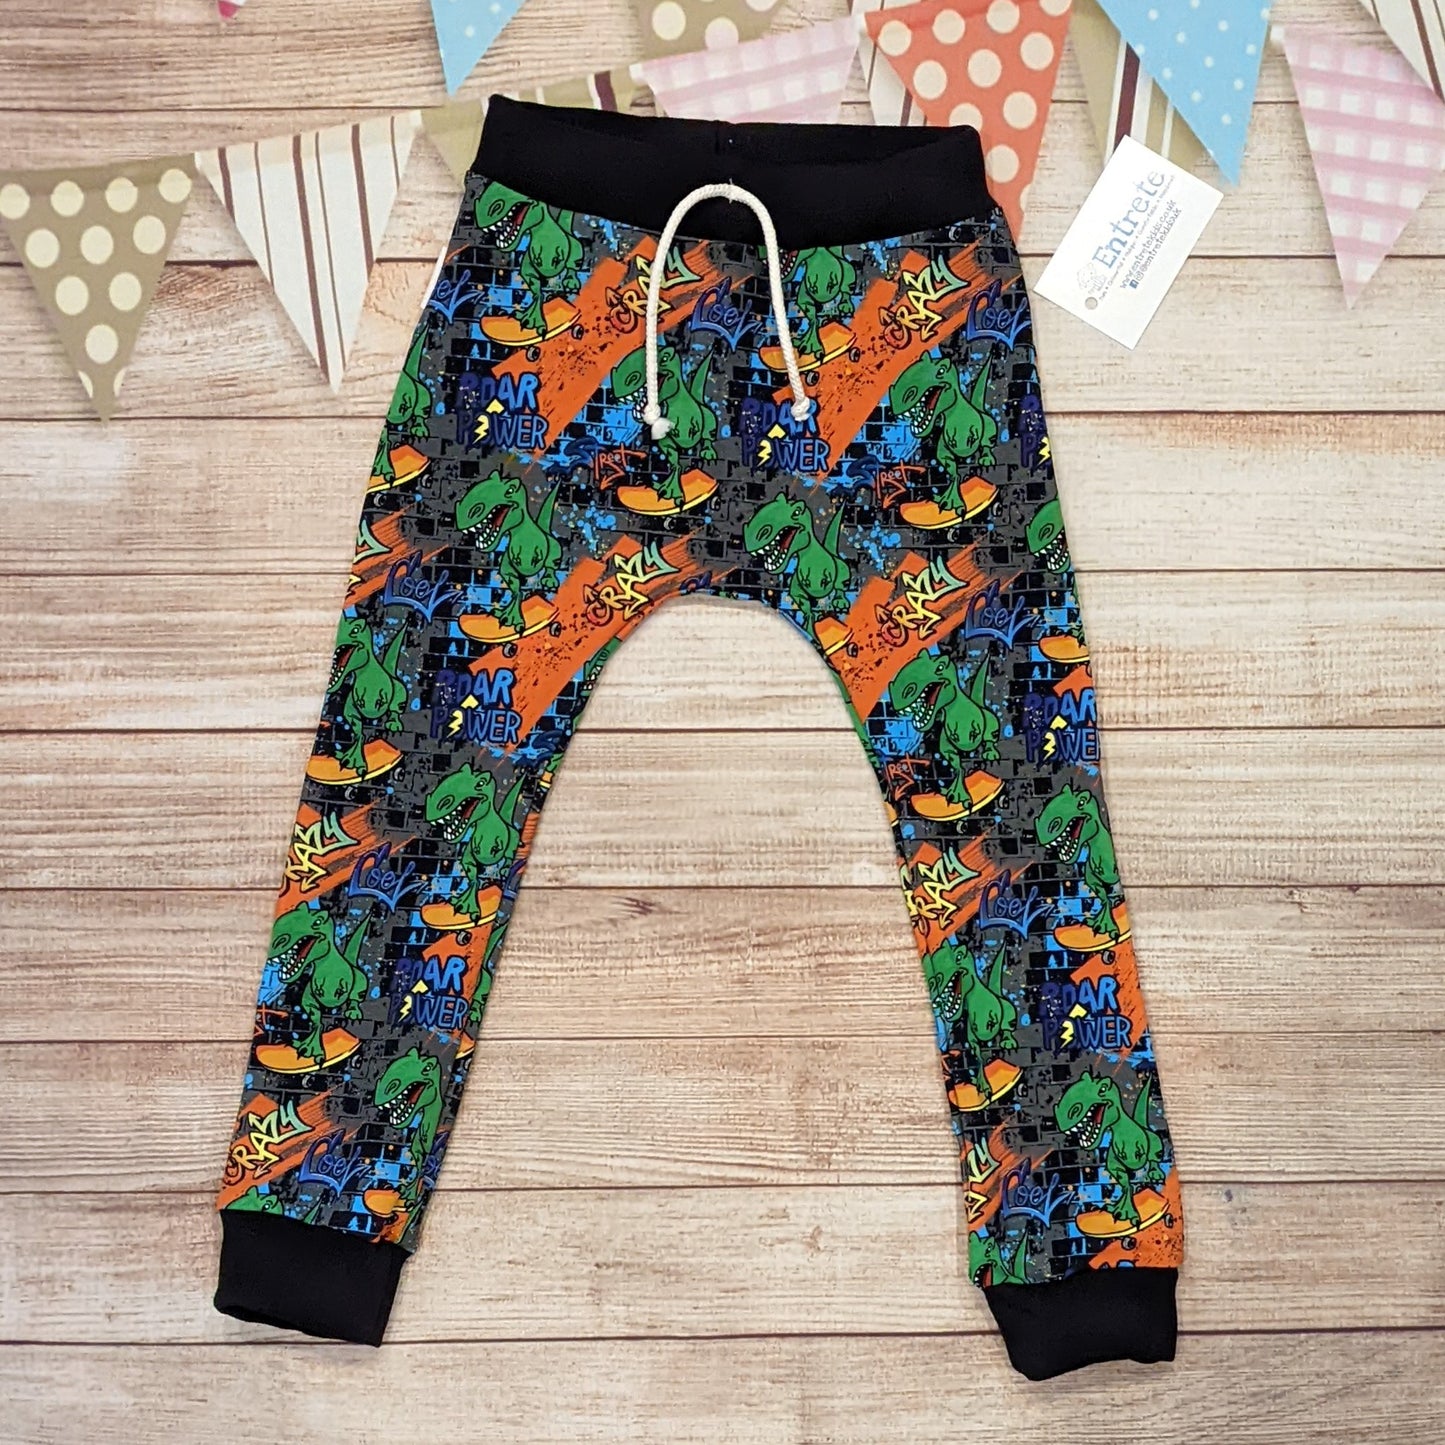 The insanely fun skateboarding dinosaurs harem joggers, handmade using street dino cotton French terry and black cotton ribbing.